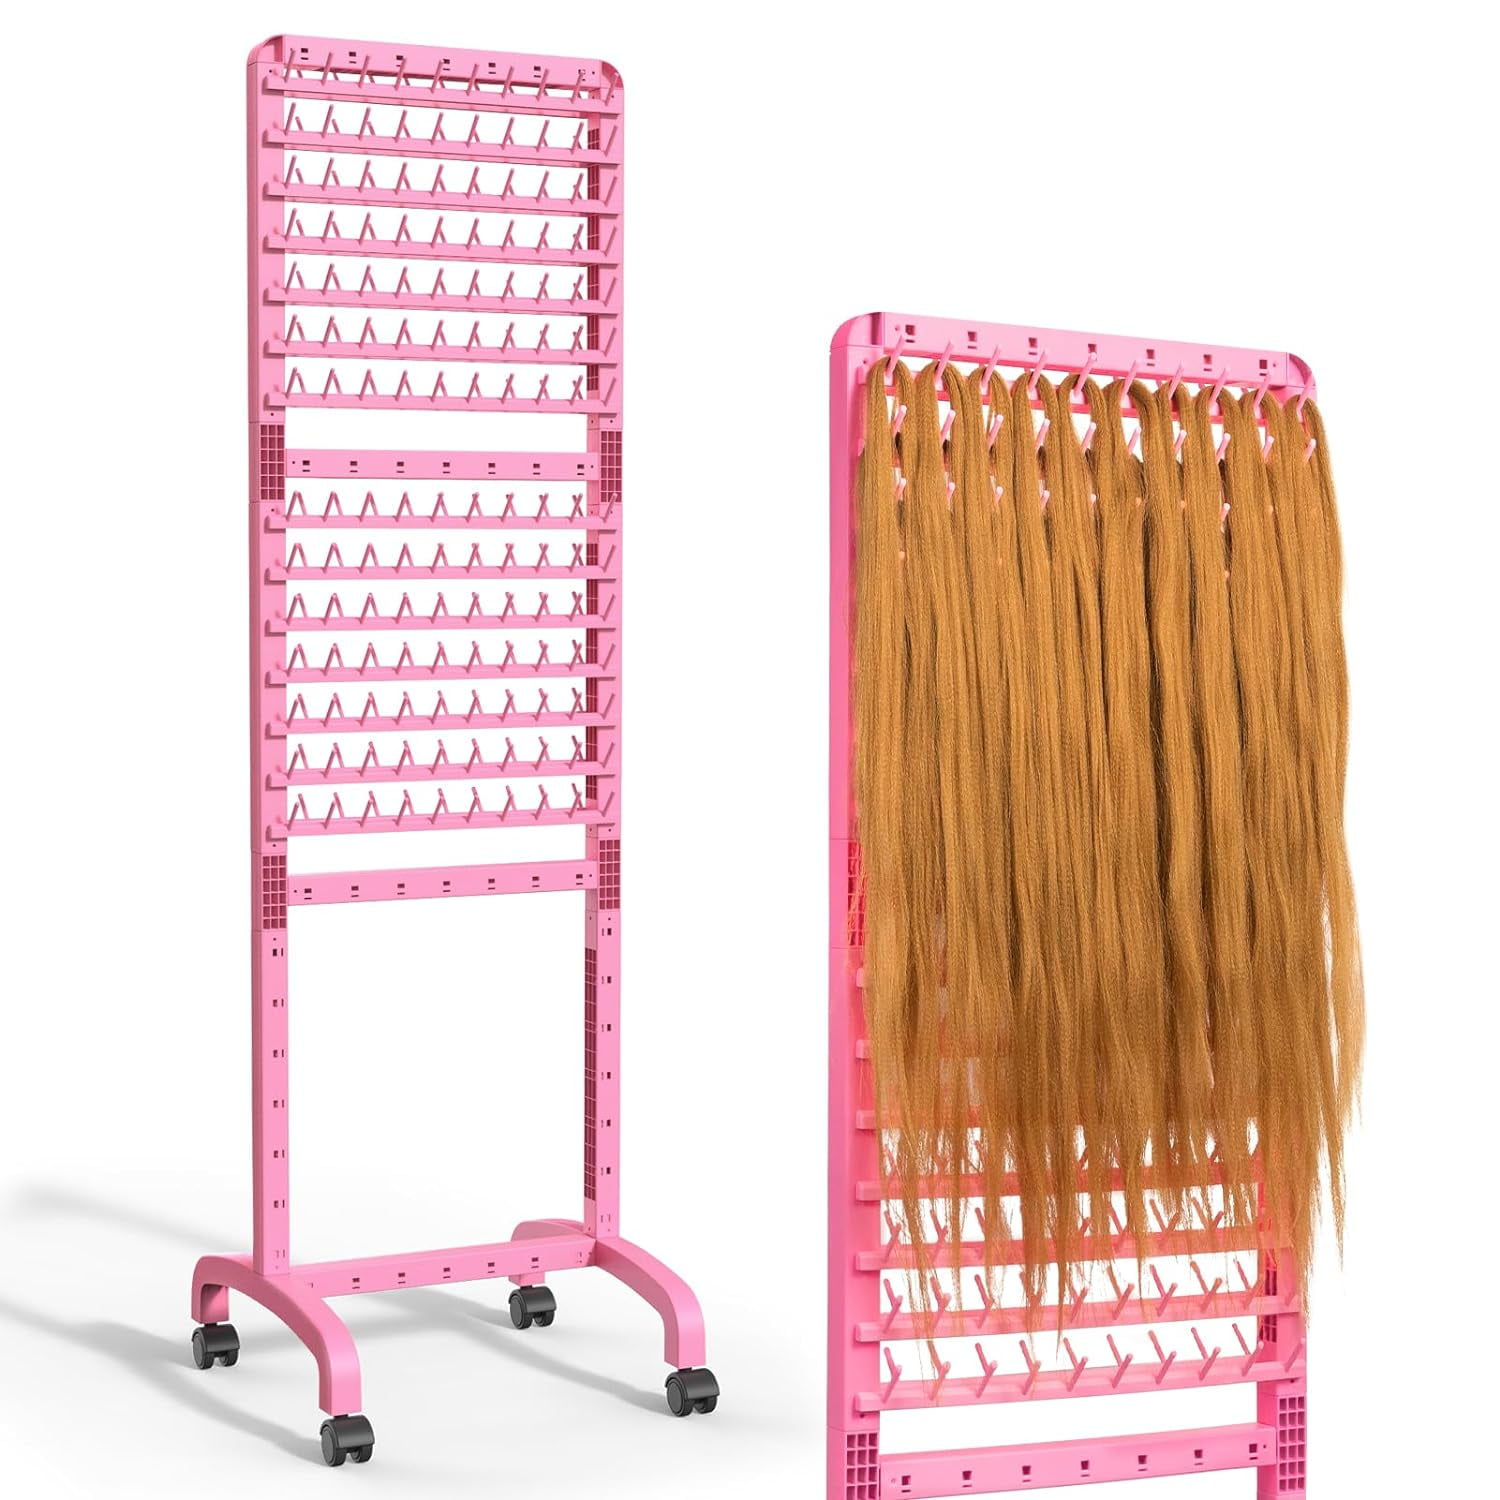 Michaele Wooden 120 Pegs Rotatable Braiding Hair Rack with Locking Caster Wheels Rebrilliant